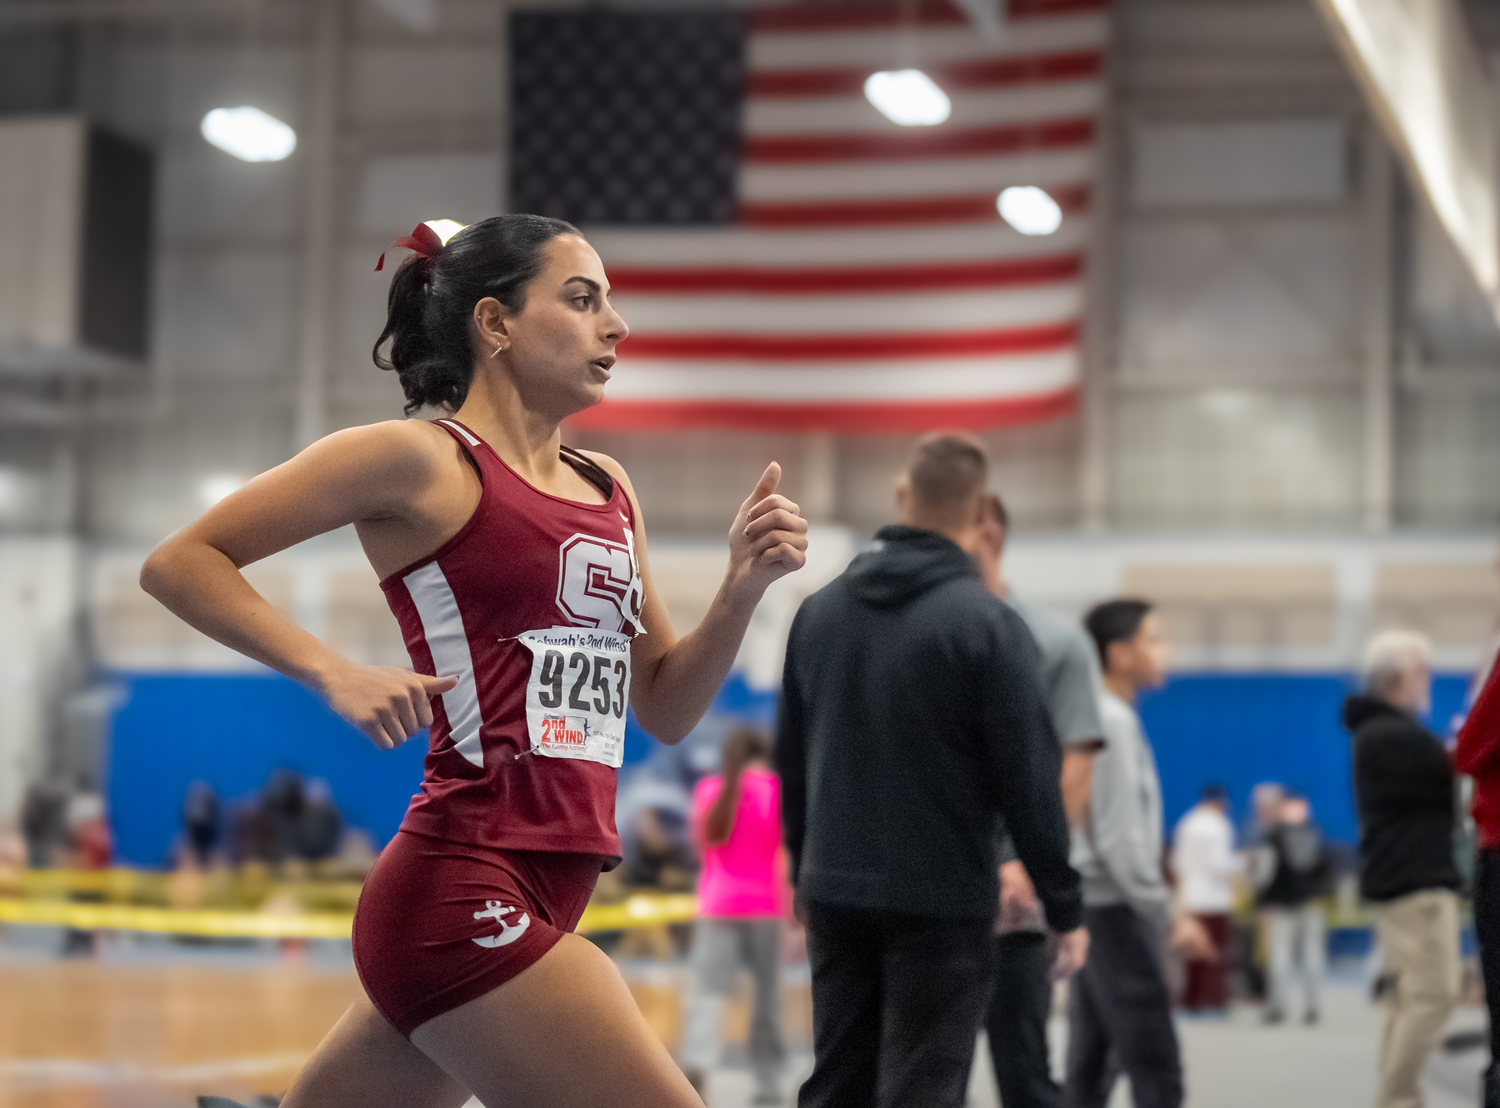 Southampton senior Jeorgiana Gavalas ran in both the 1,000- and 1,500-meter races at last week's state qualifier.   RON ESPOSITO